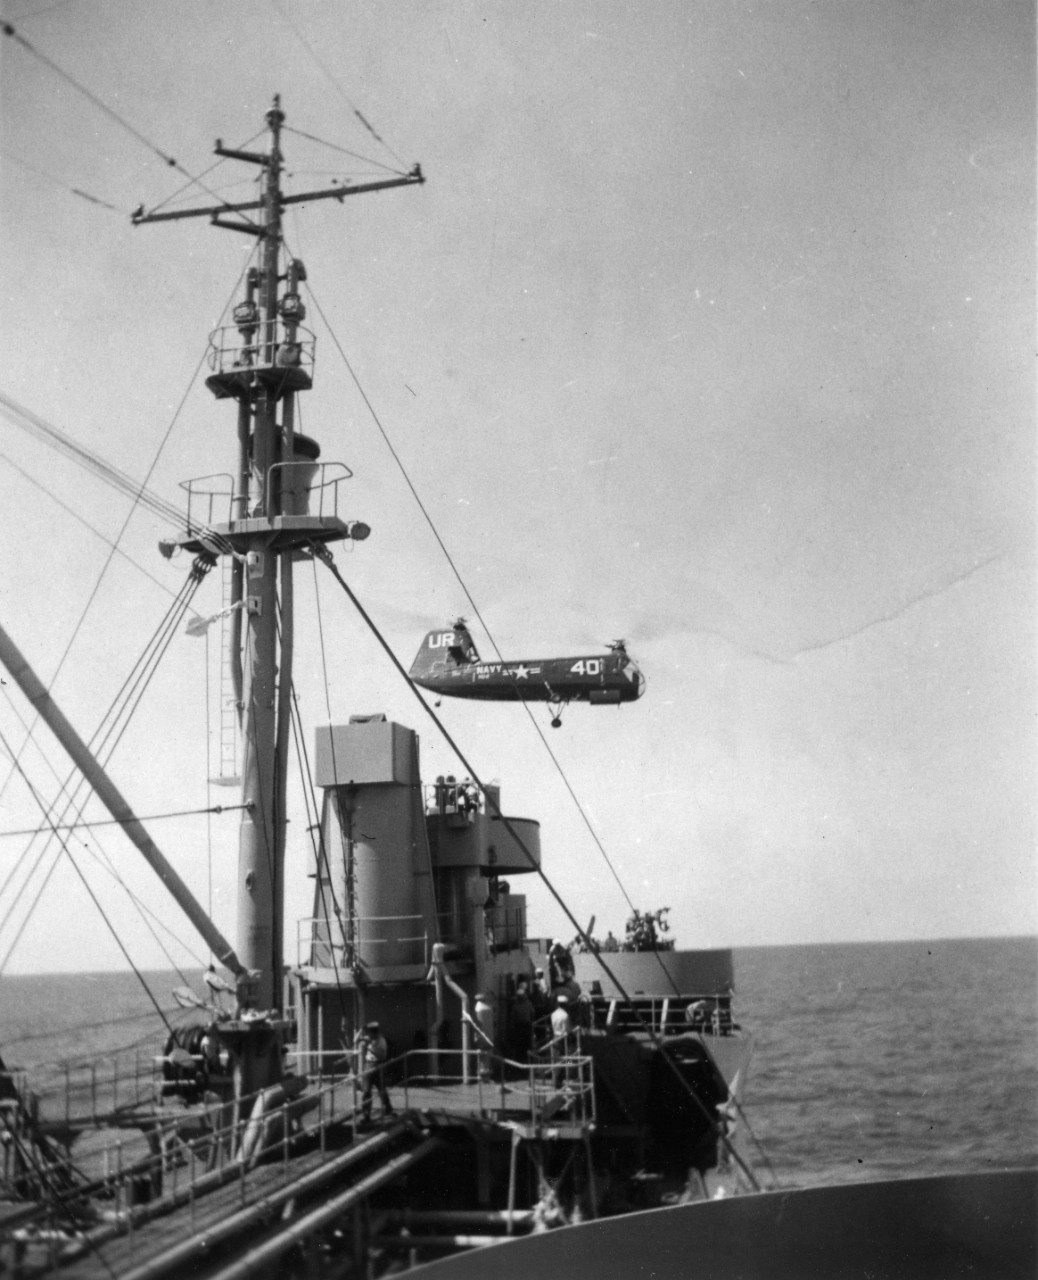 Collection of 36 black and white photographs and 1 postcards, formerly belonging to the donor’s father, James R. Jack, who served in the Navy in the 1950’s. Good views of underway replenishment, mostly taken from on board USS Marias (AO-57). Other ships shown include: USS Altair (AKS-32), USS Allagash (AO-97), USS Coral Sea (CVA-43), USS Plymouth Rock (LSD-29), USS Mississinewa (AO-144), and an unidentified destroyer. Also seen: coming into port at Naples; ship’s band playing; swim call; small boat operations; highline operations; mail operations involving Piasecki HUP-2 Retriever Helicopter.